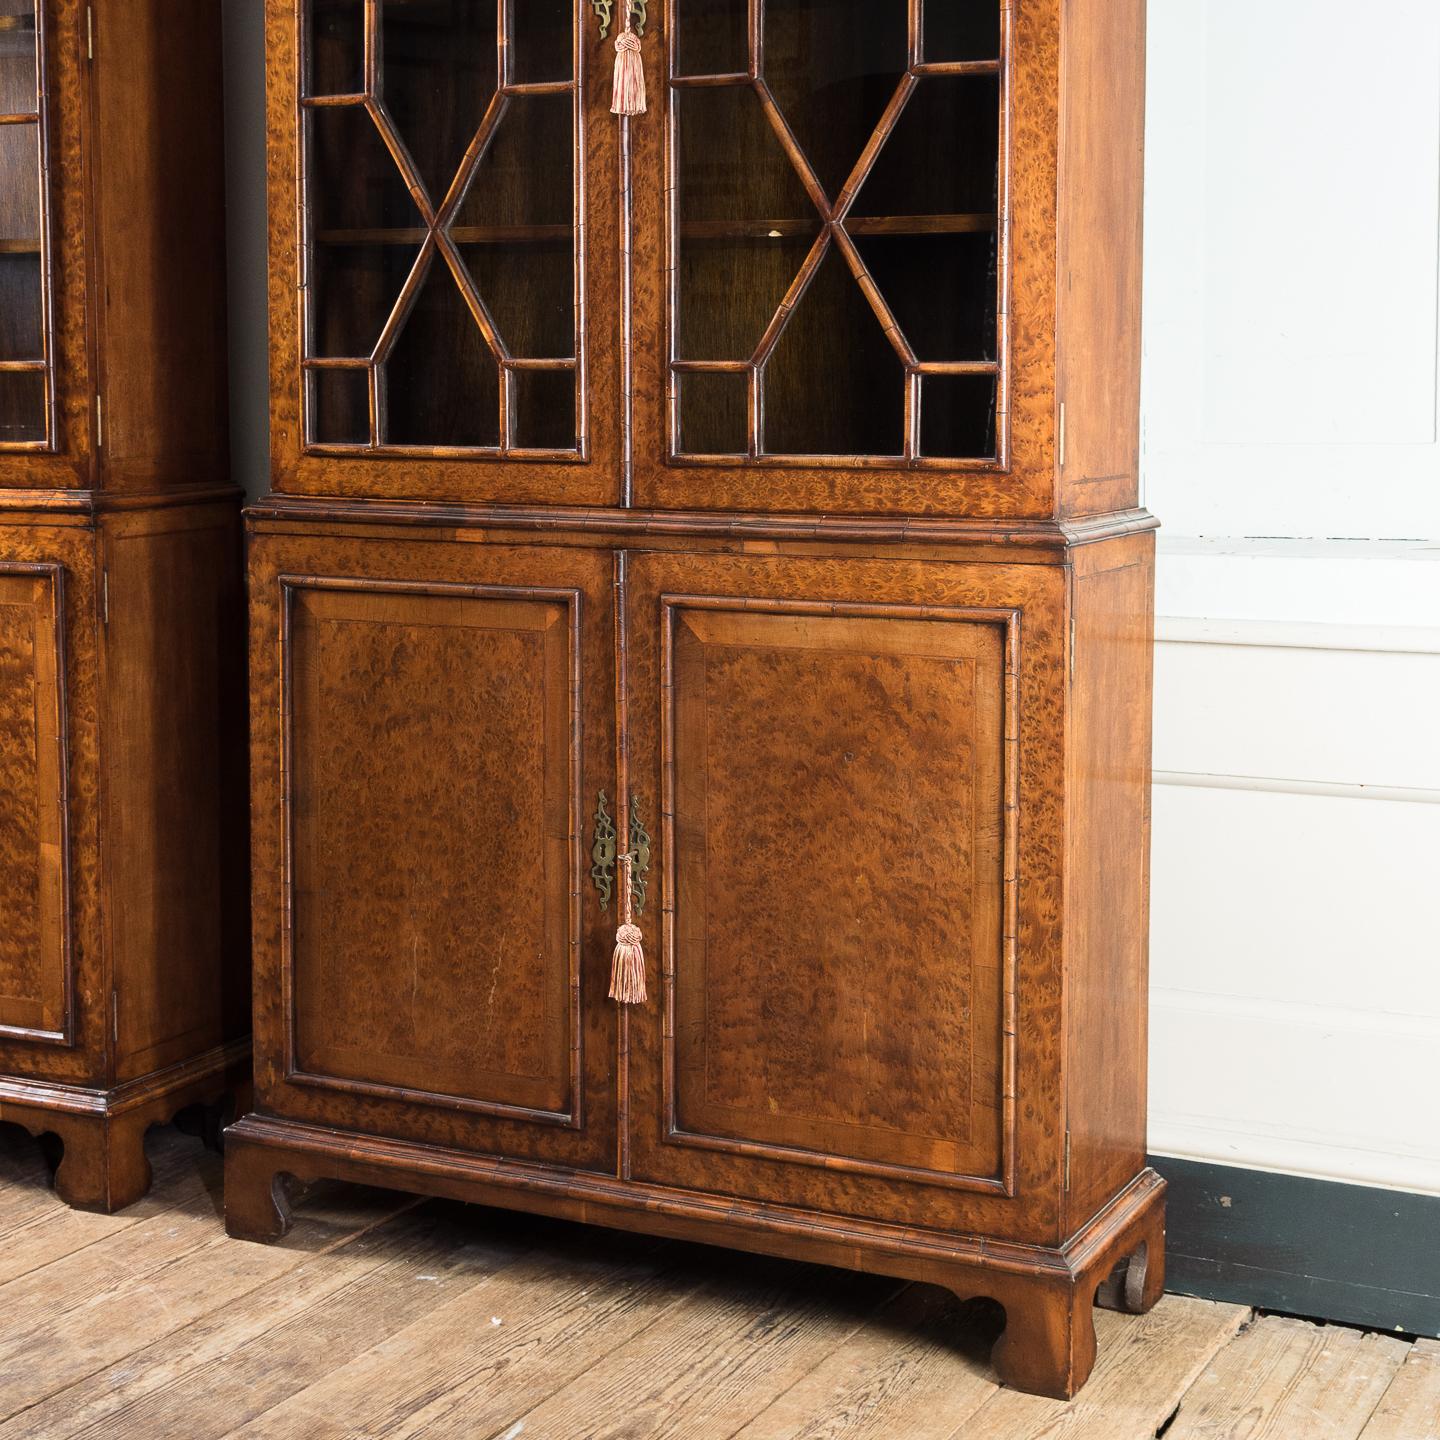 British Pair of George II Style Burr Yew Bookcases